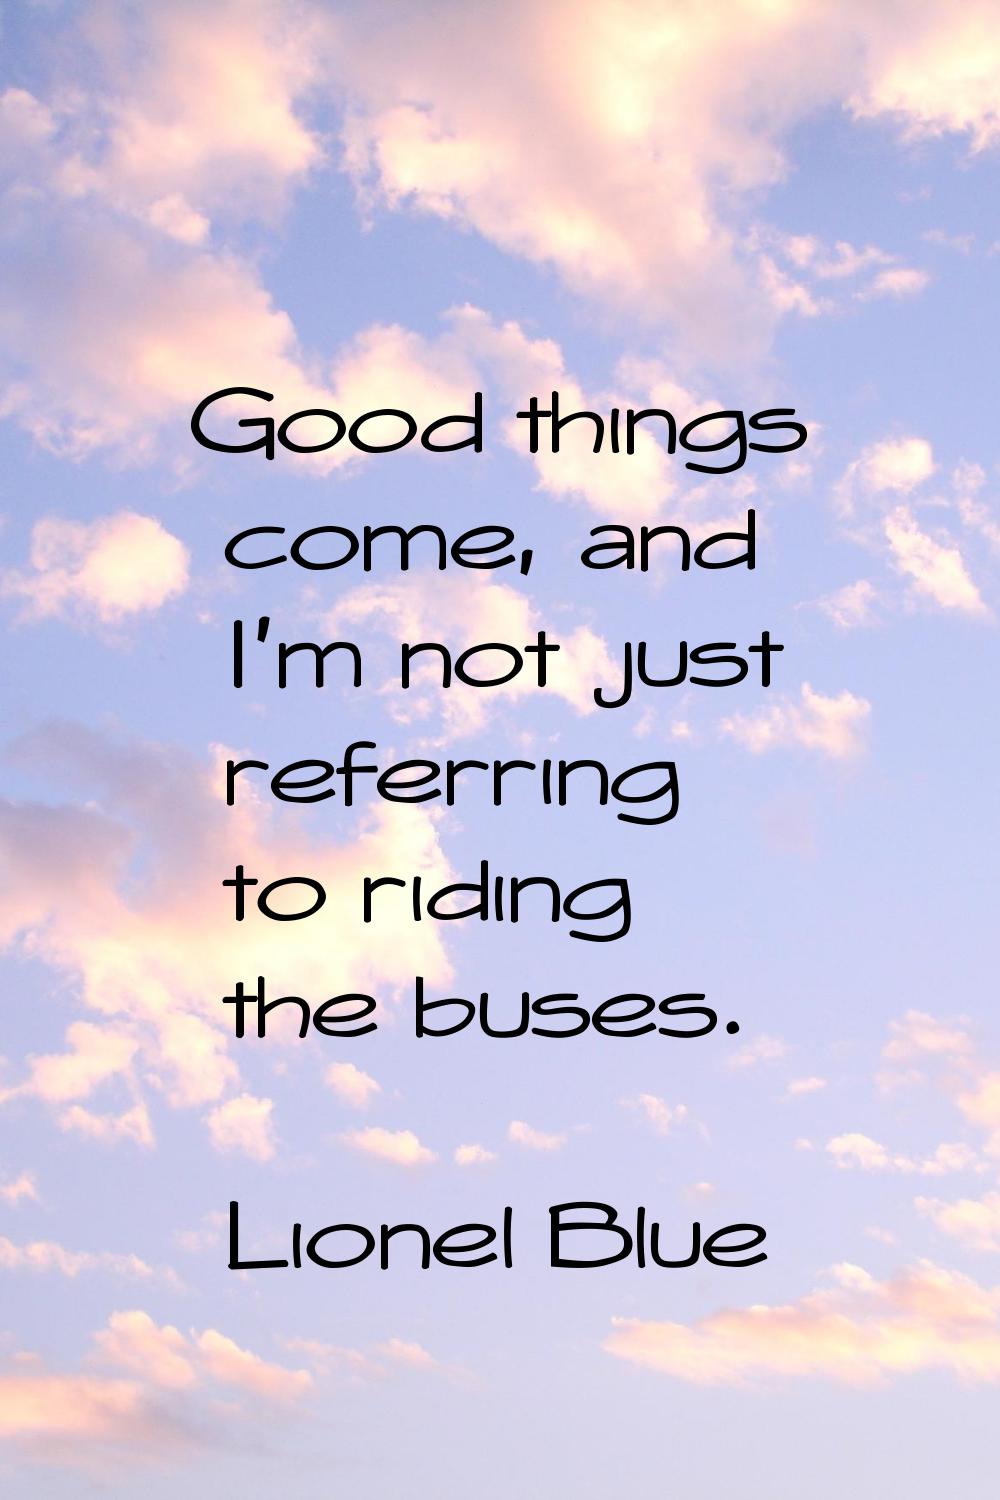 Good things come, and I'm not just referring to riding the buses.